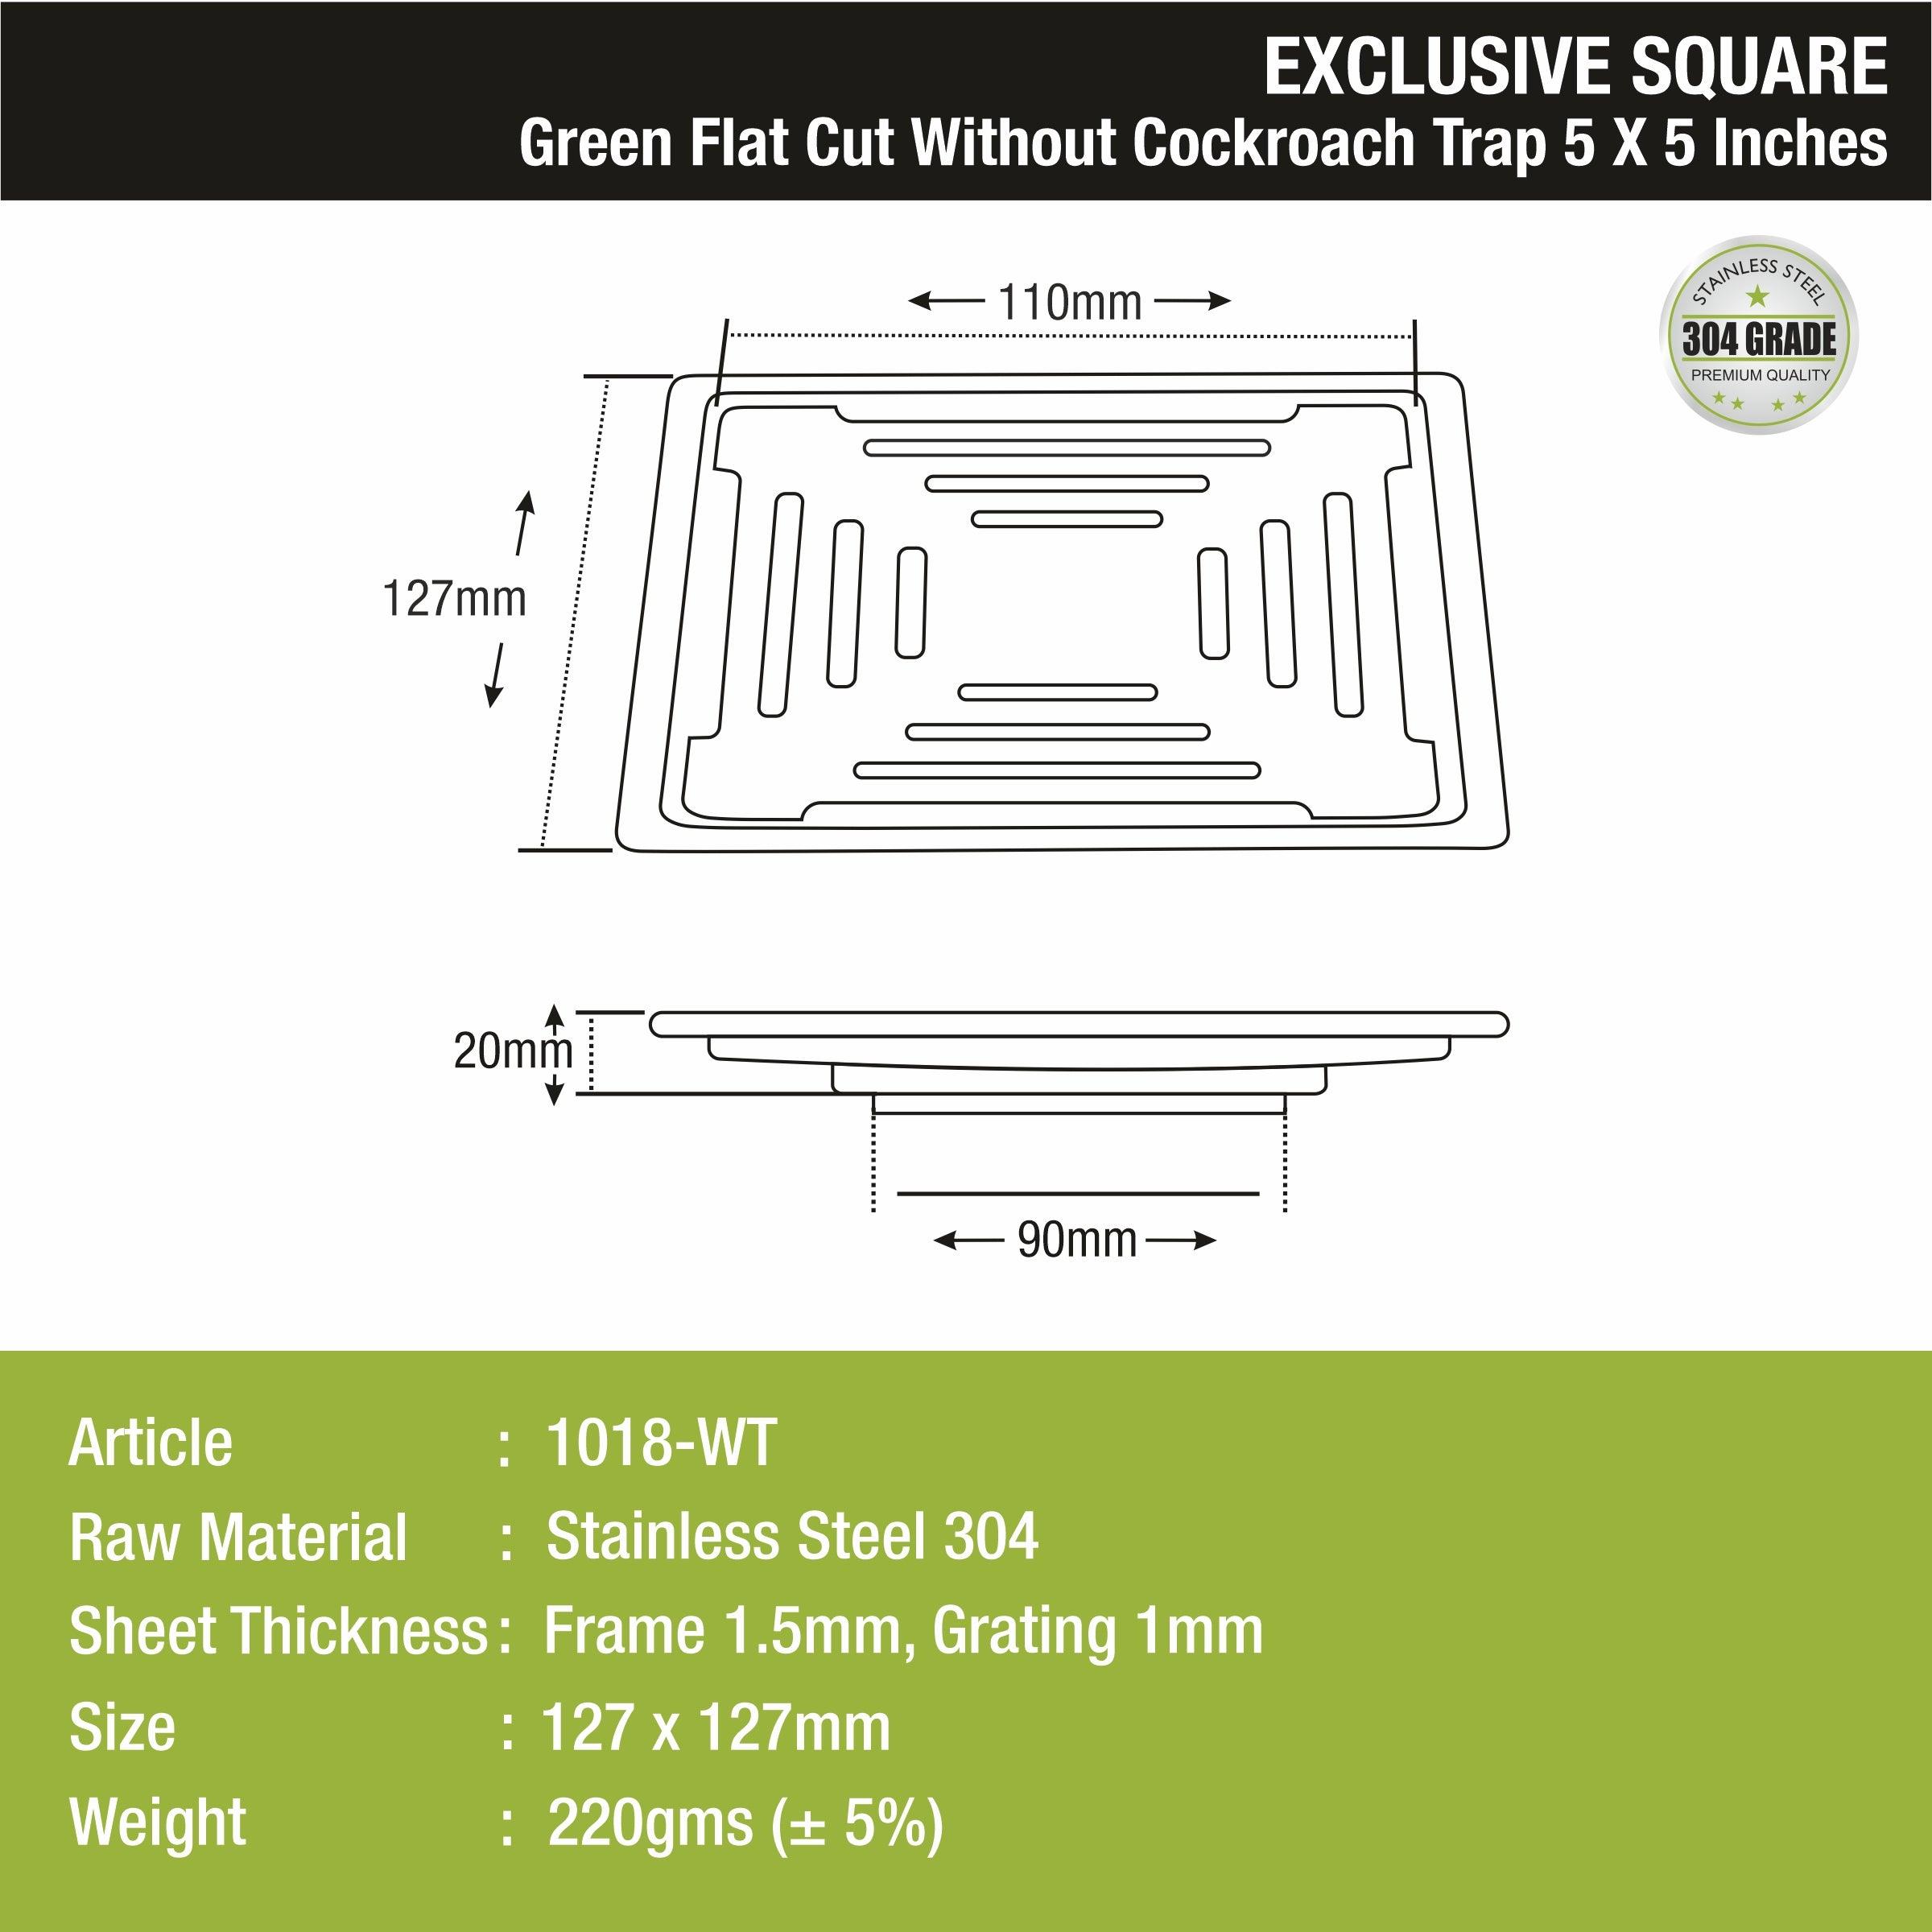 Green Exclusive Square Flat Cut Floor Drain (5 x 5 Inches) sizes and dimensions